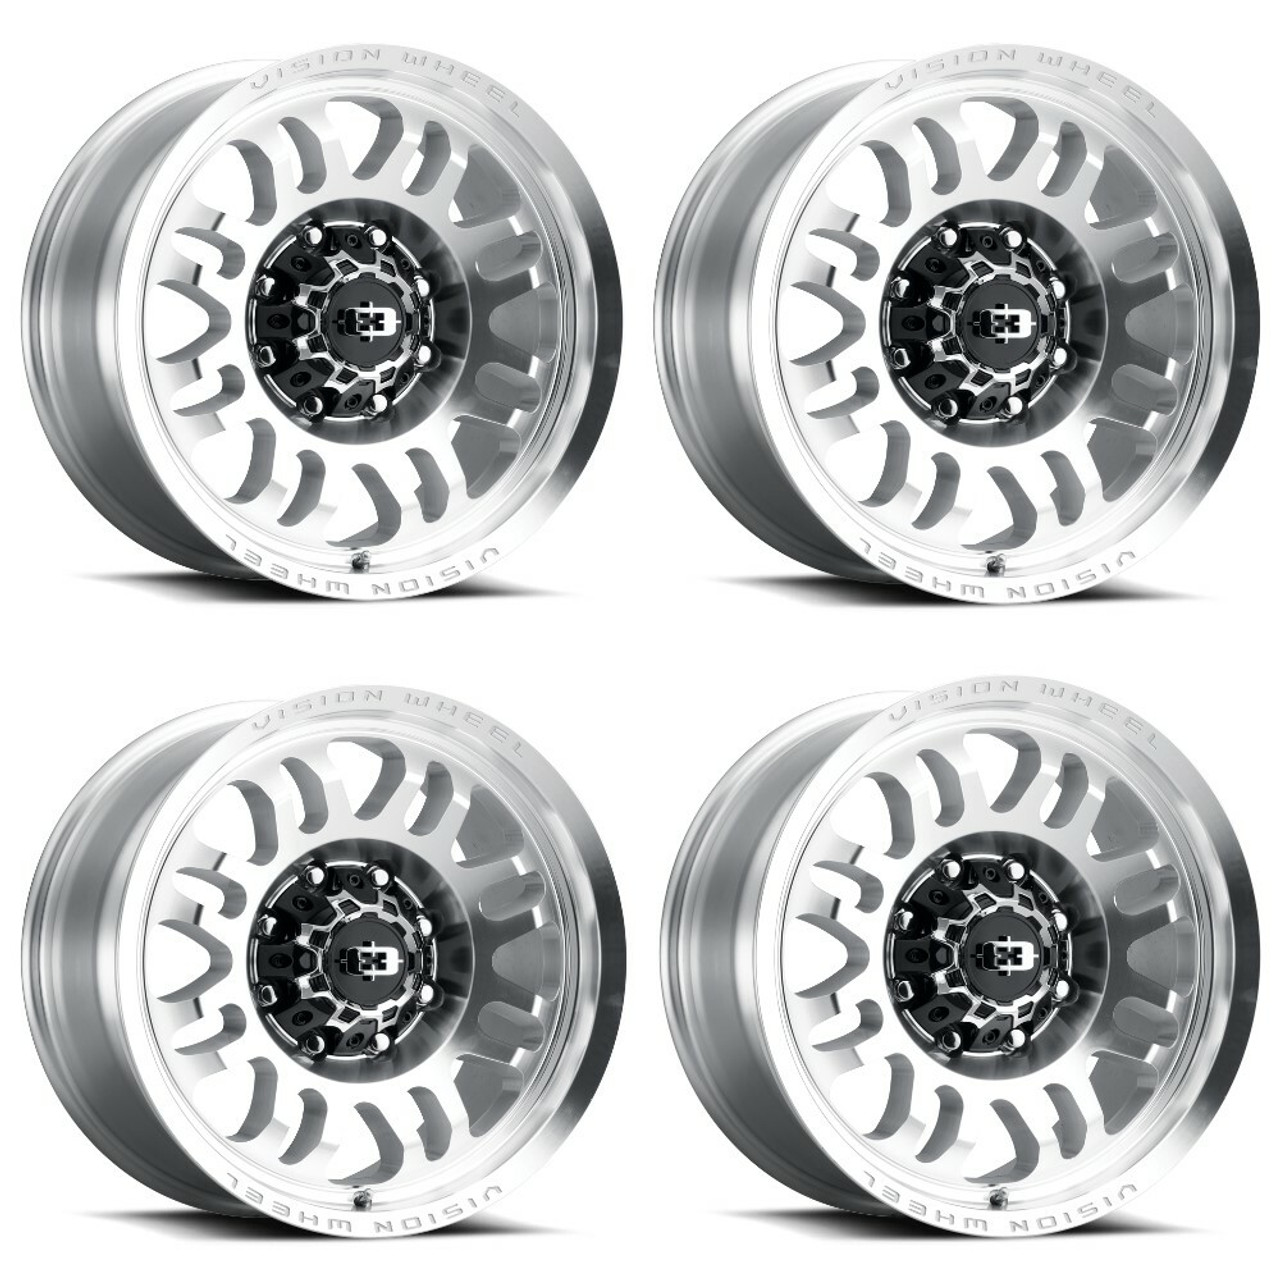 Set 4 17" Vision 409 Inferno Milled Machine 6x120 Wheels 12mm For GMC Chevy